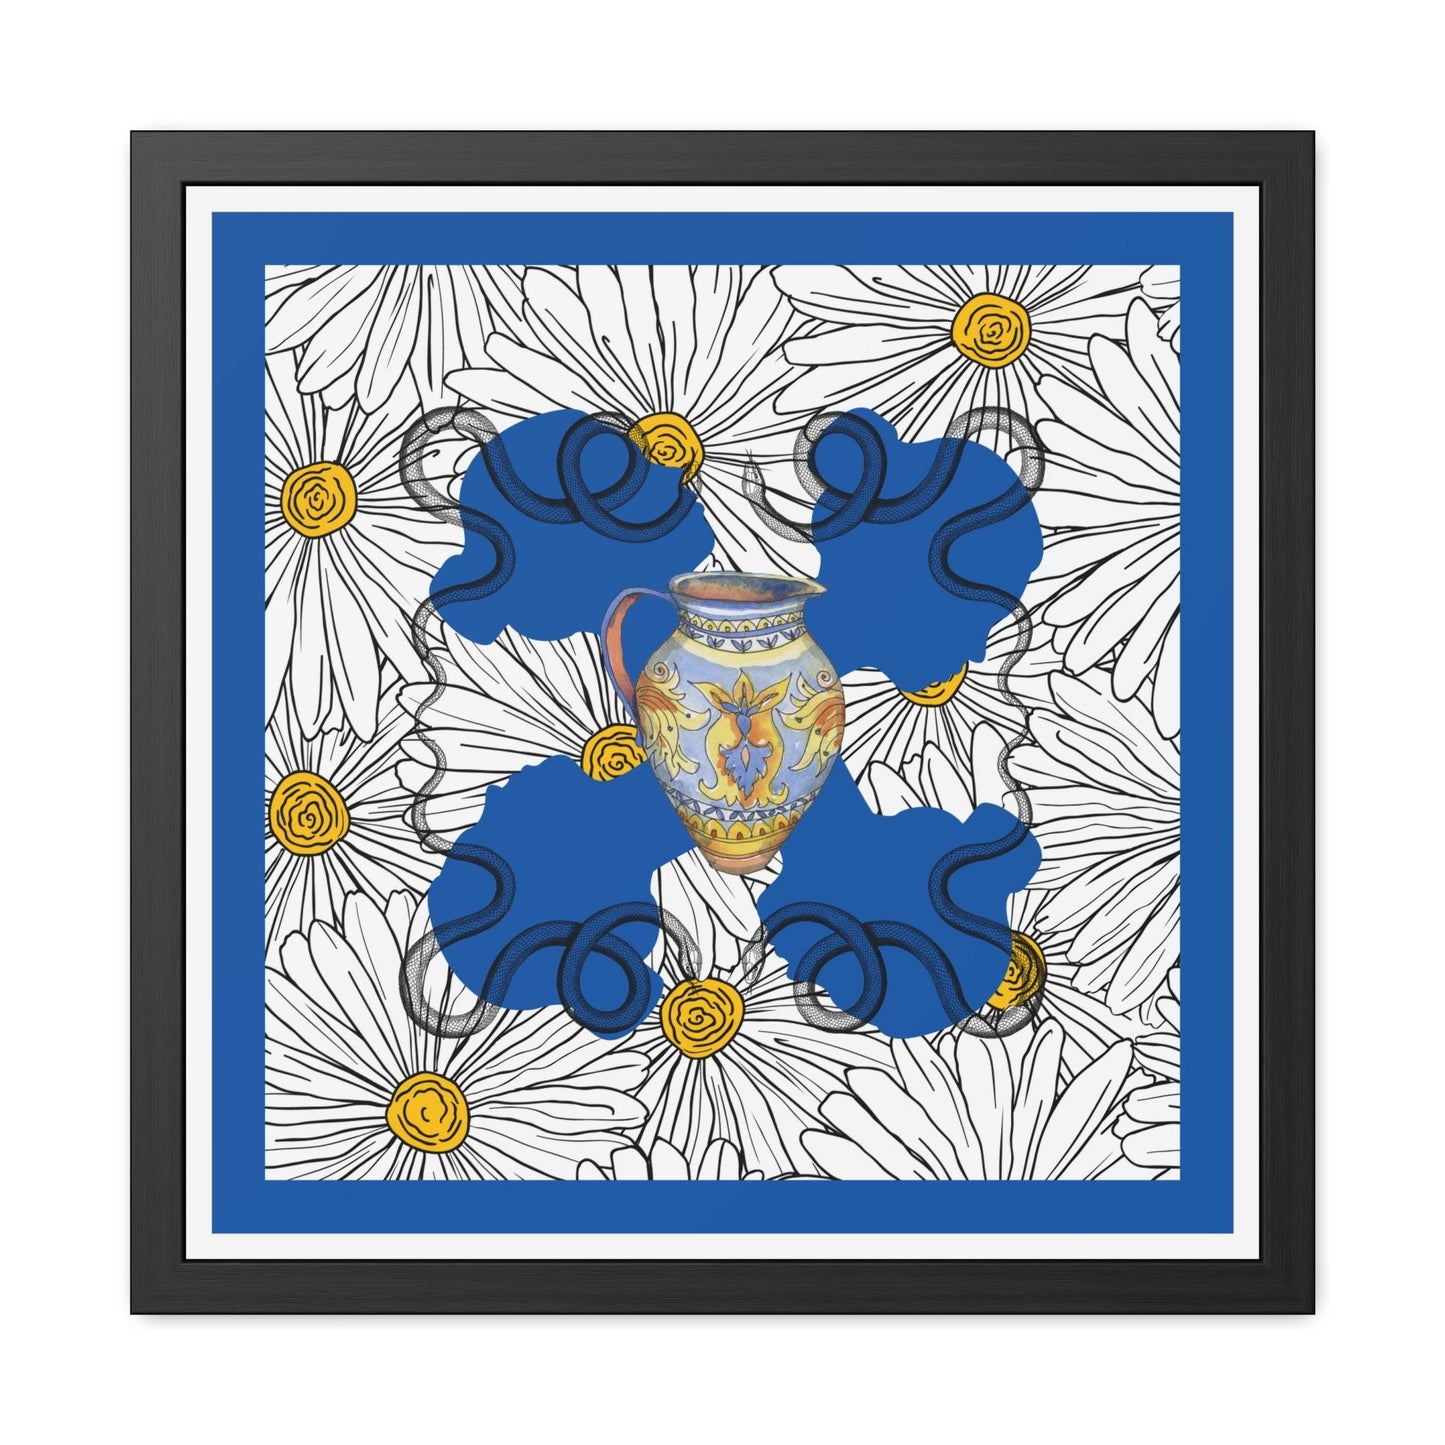 White Daisy Ladies in Blue Framed Poster Wall Art - MAIA HOMES